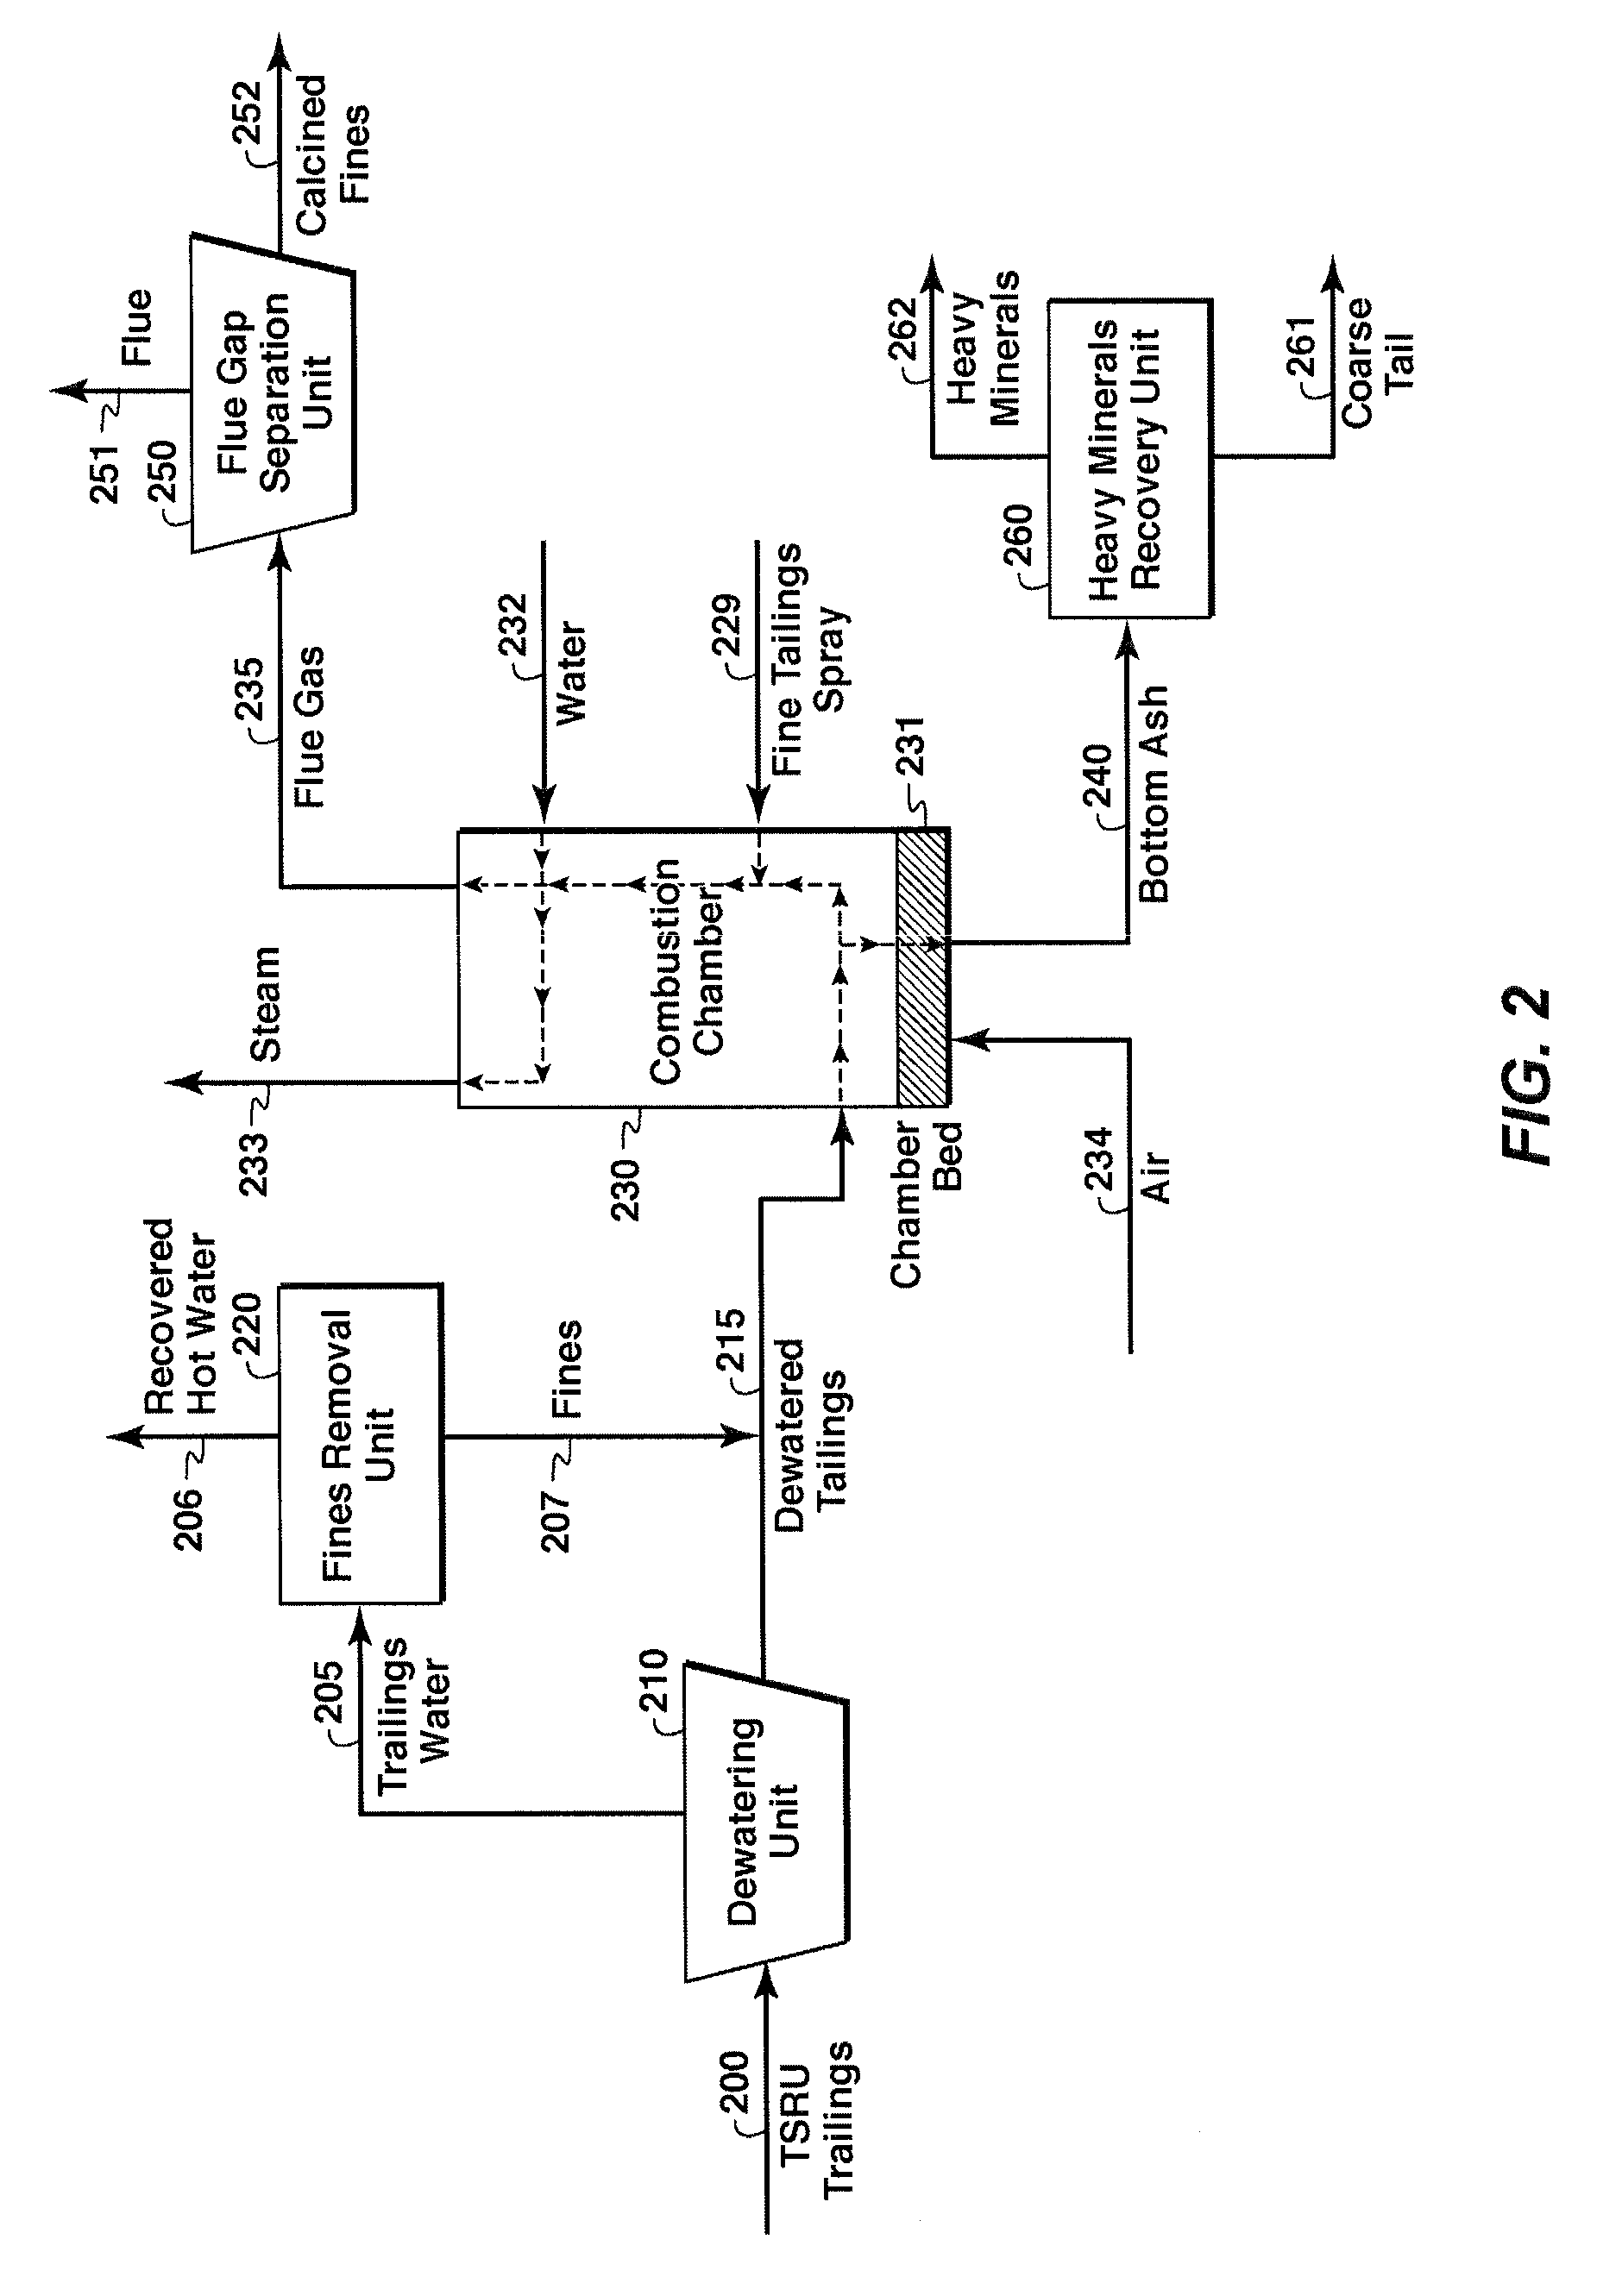 System and Method For Treating Tailings From Bitumen Extraction